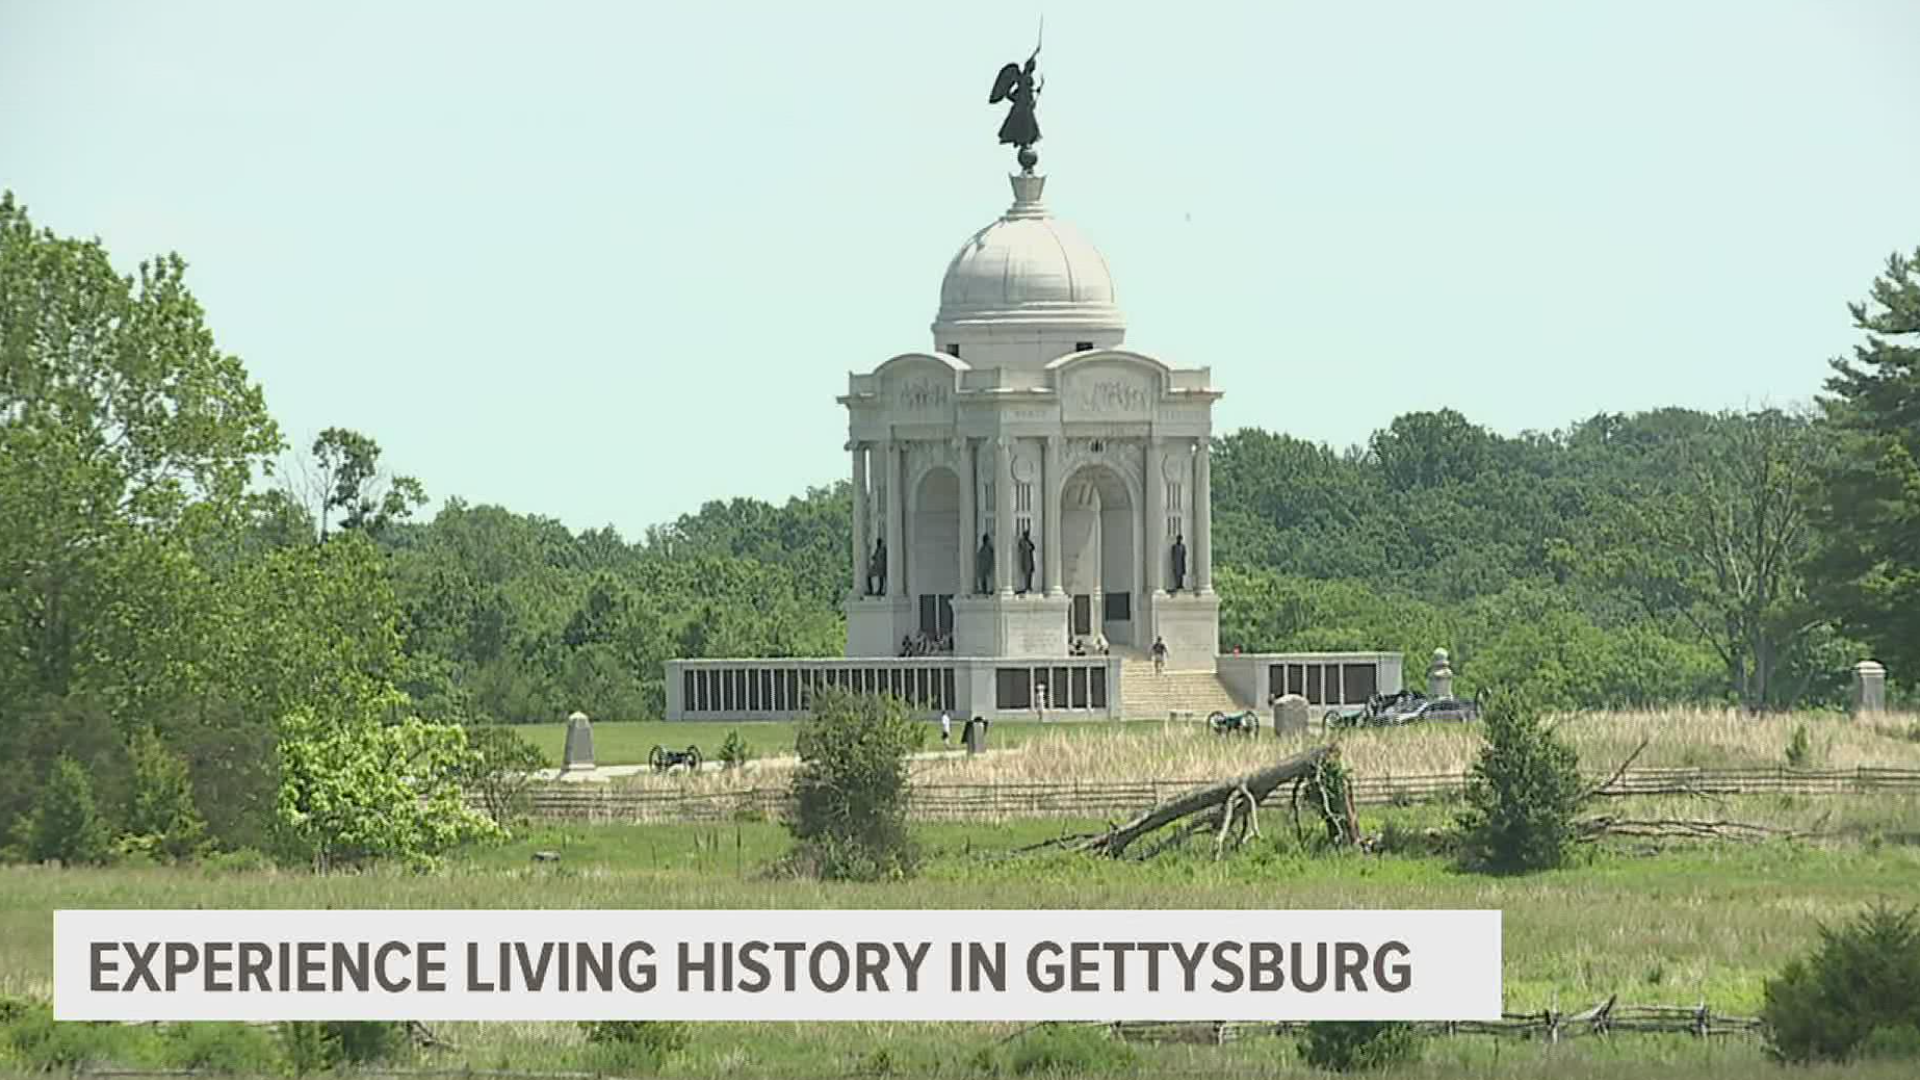 As gas prices continue to rise, consider staying local by traveling to Gettysburg, which is rich in history, small shops, and restaurants.